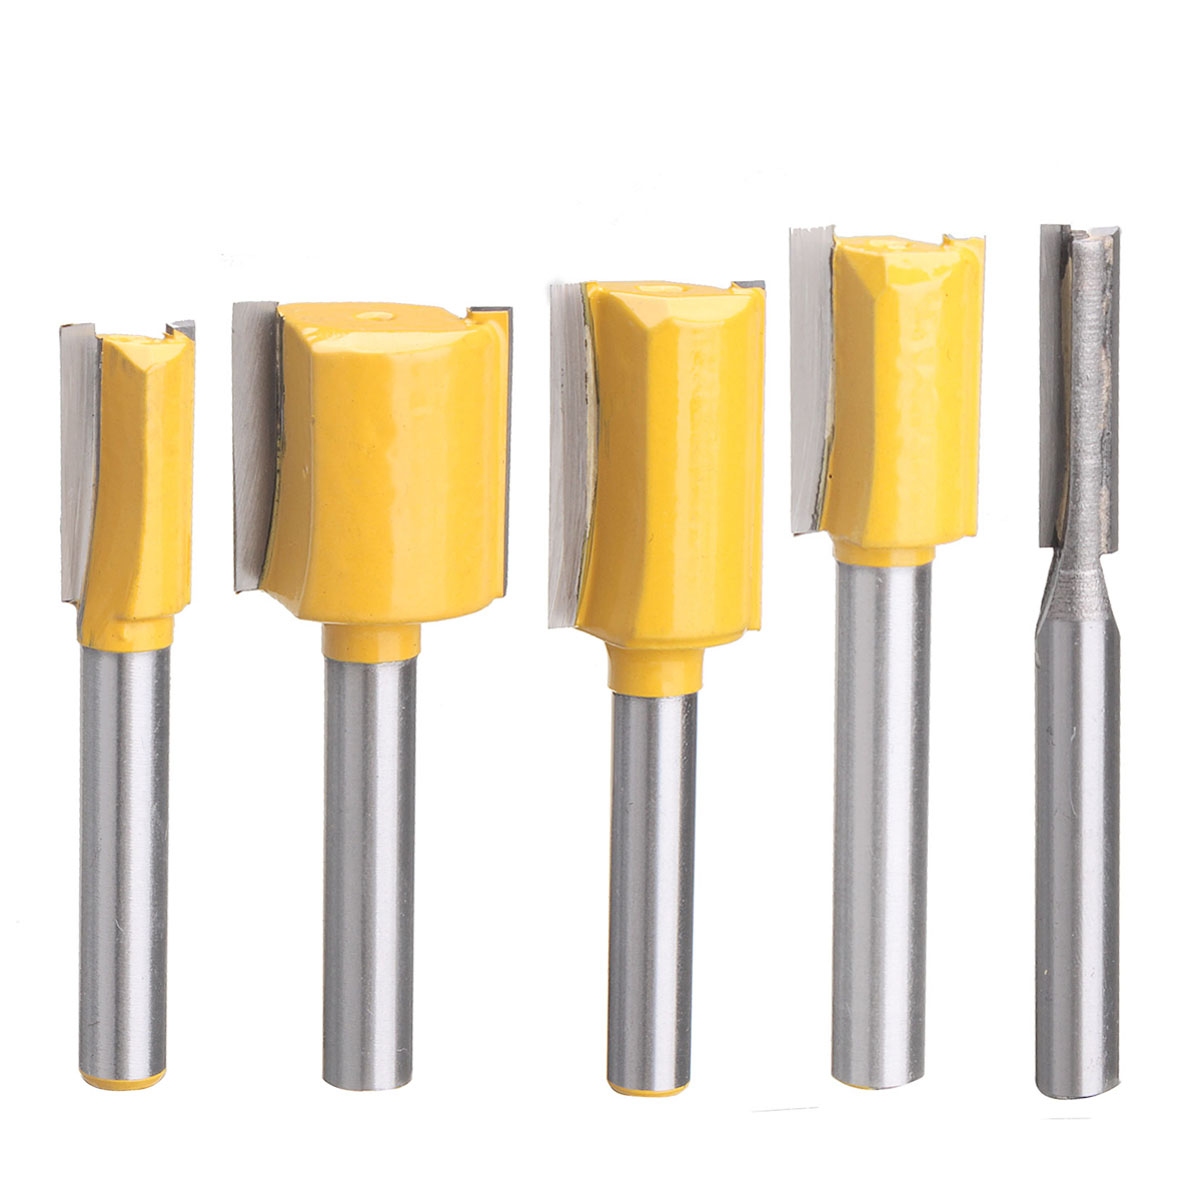 

5pcs 1/4 Inch Shank Straight and Dado Router Bit Set Trimming Cutter For Woodworking